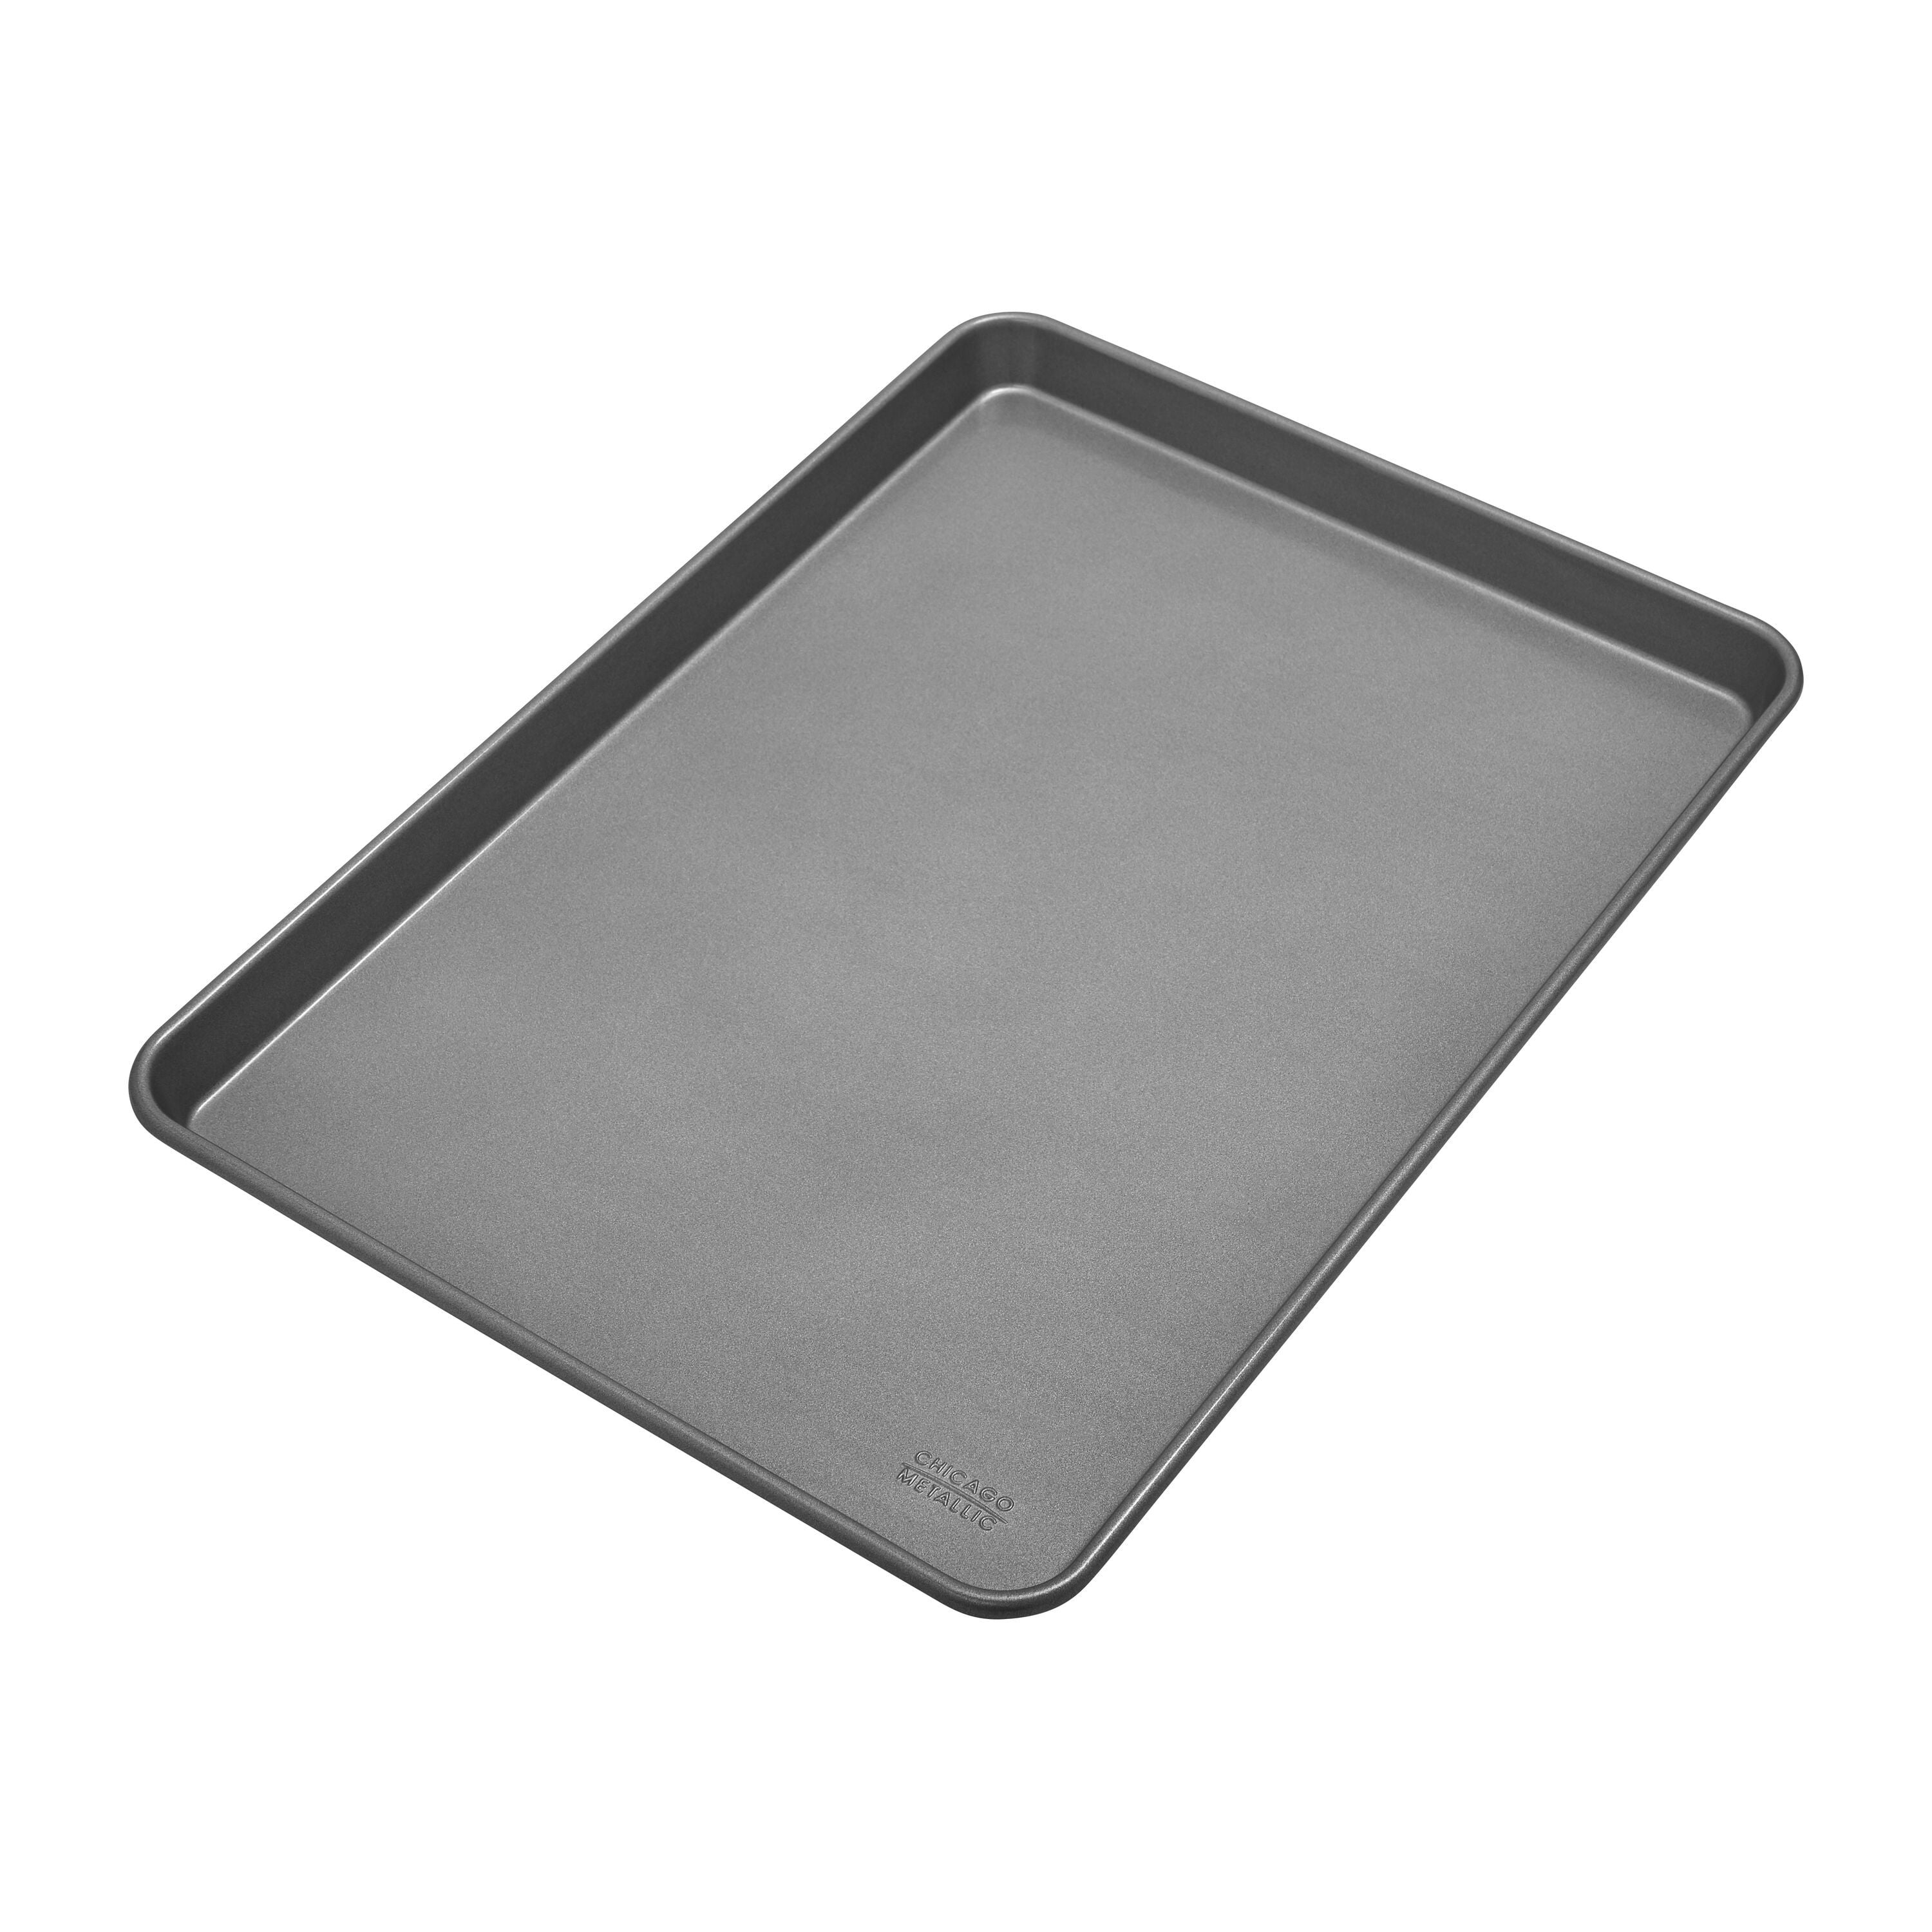 Chicago Metallic Professional CookieJelly Roll Pan 18 x 13 x 1 in.